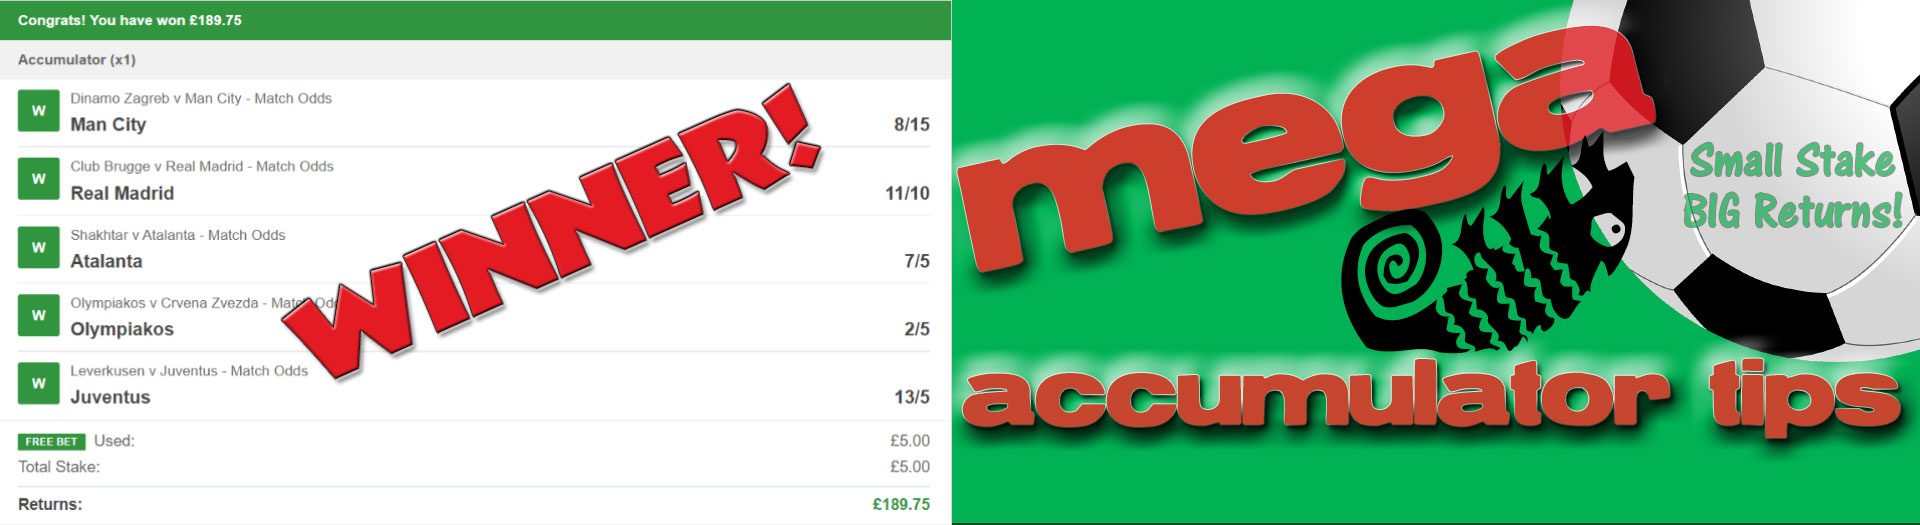 Accumulator Tips free every day